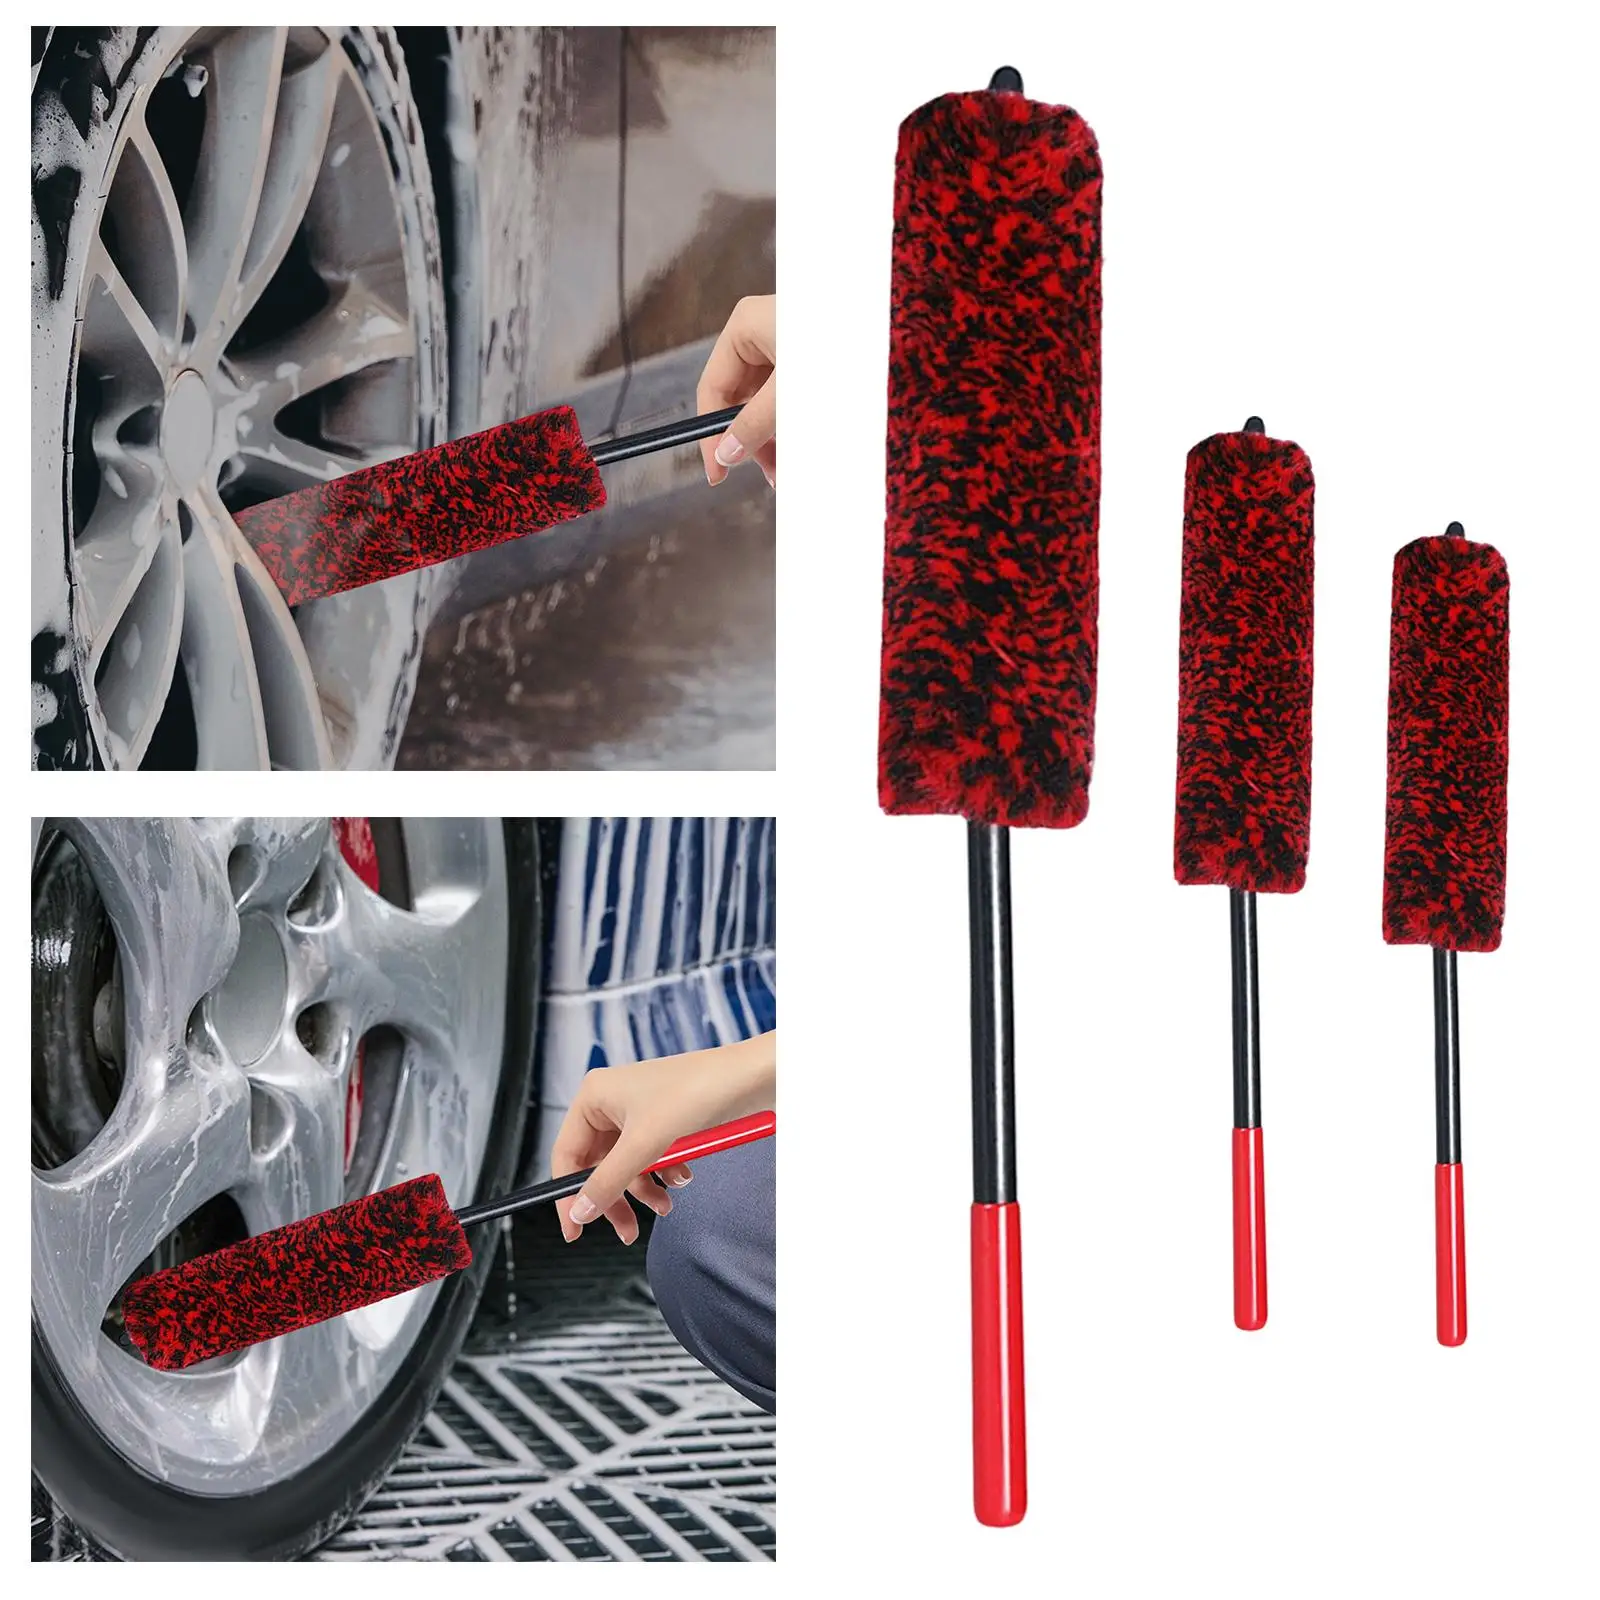 Auto Wheel Detailing Brush Car Cleaning Supplies Bendable Soft Long Handle Car Wheel Brush for Washing Wheels Rims Exterior